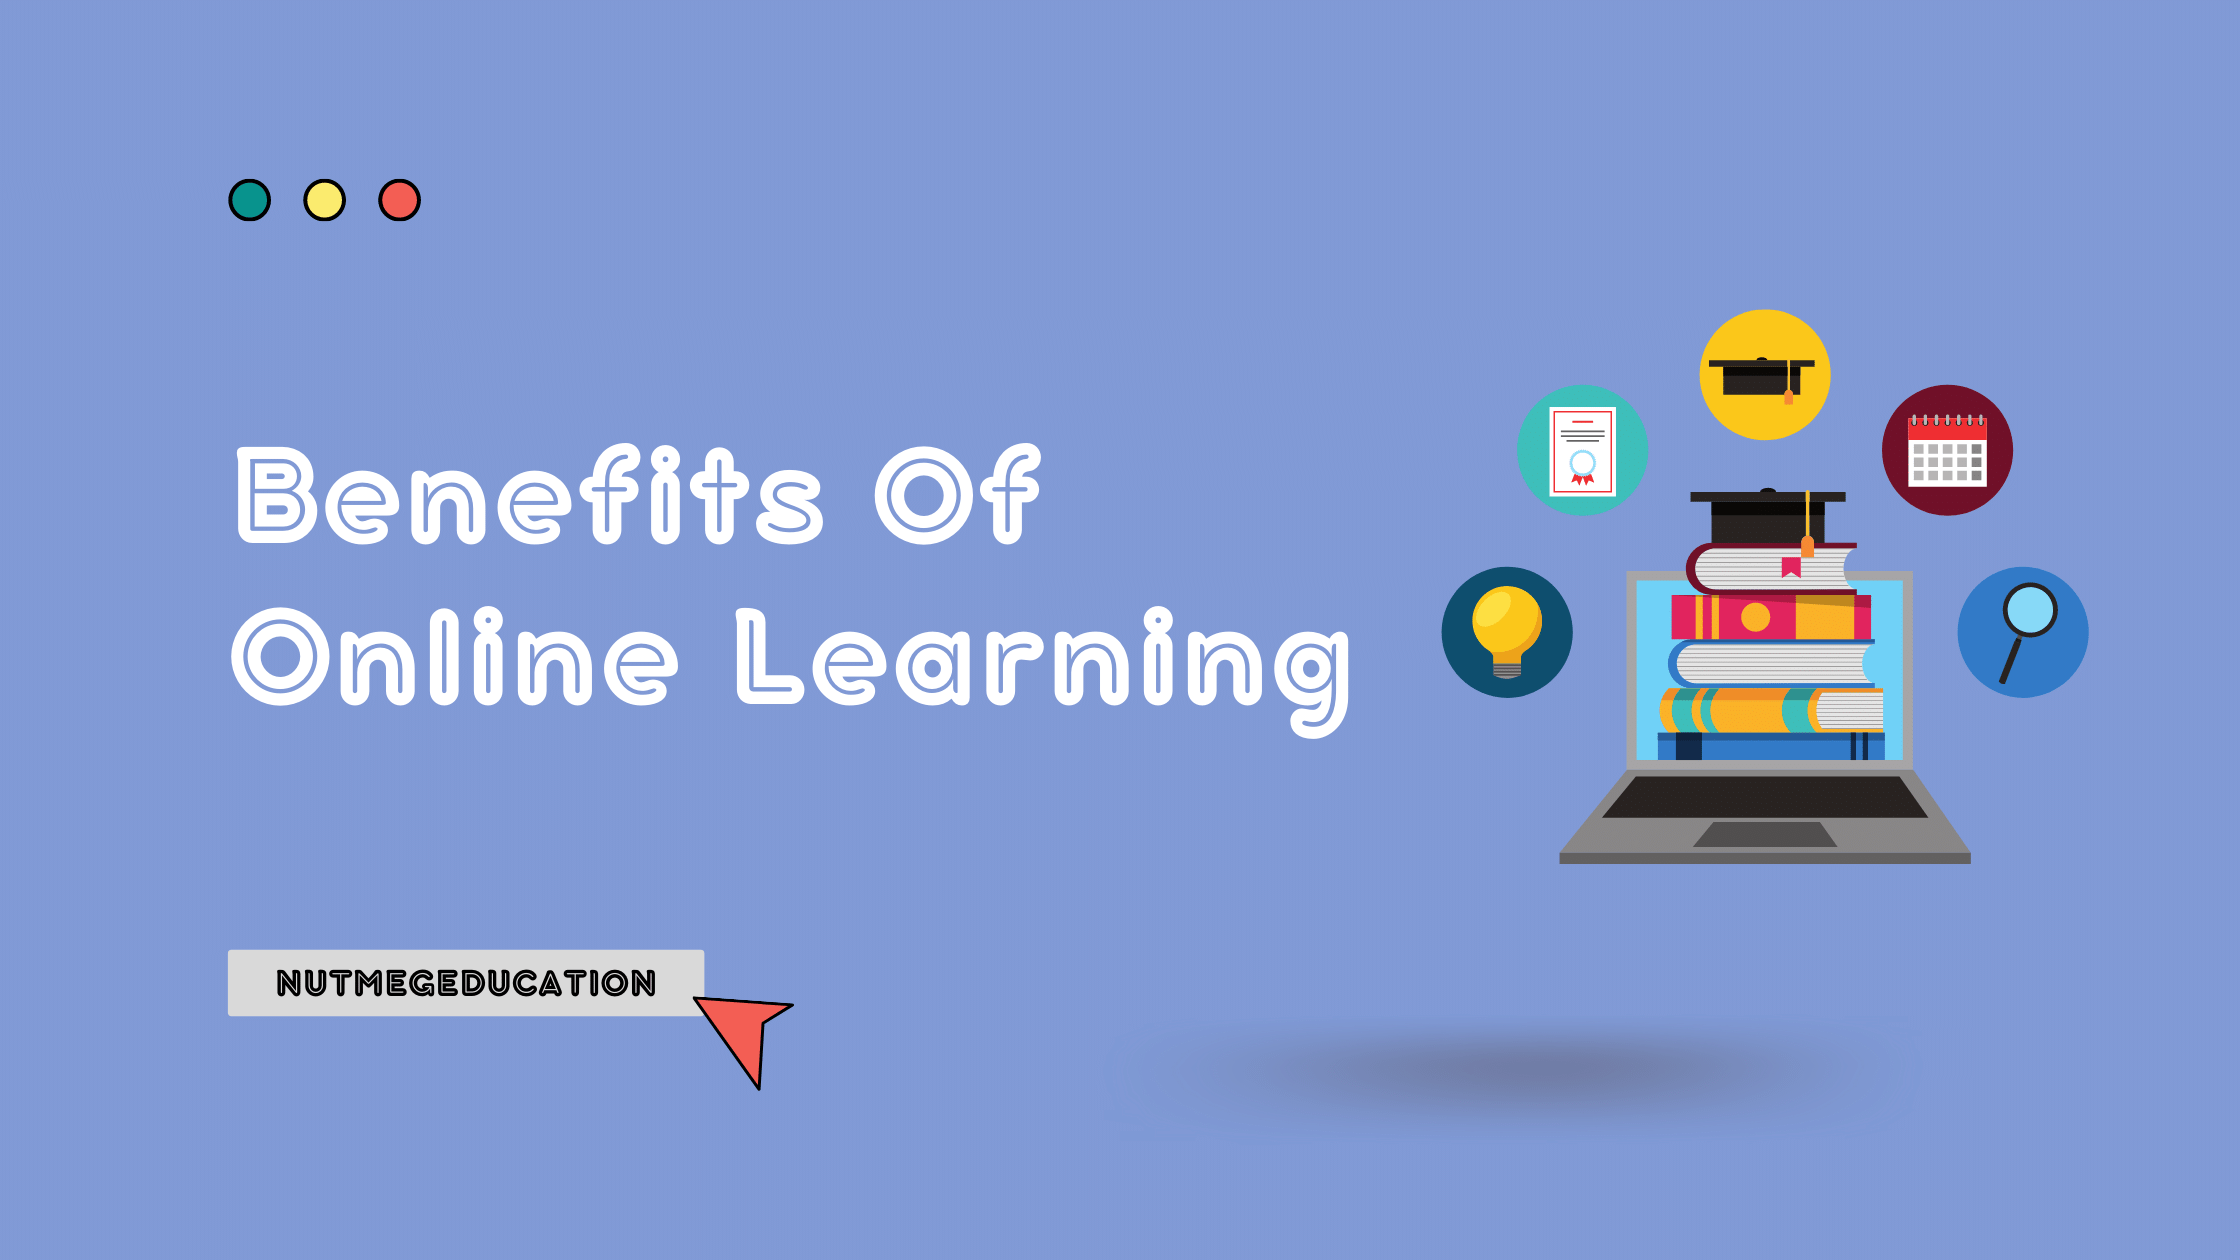 13+ BenefBenefits Of Online Learning - NutMegEducationits of Online Learning You Should Know